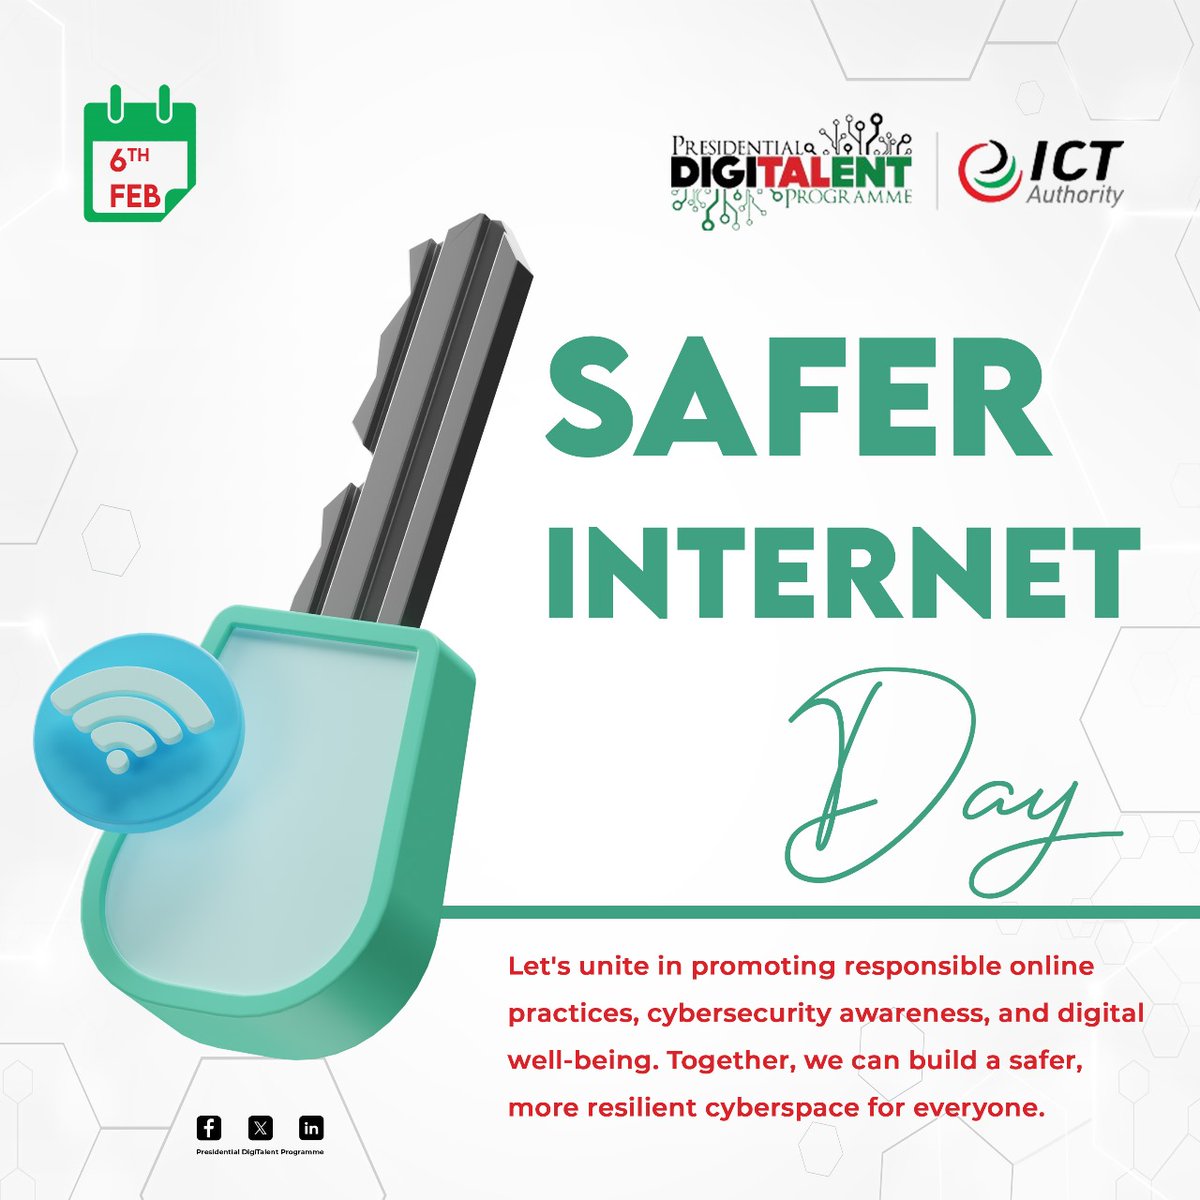 How safe are you on the internet?